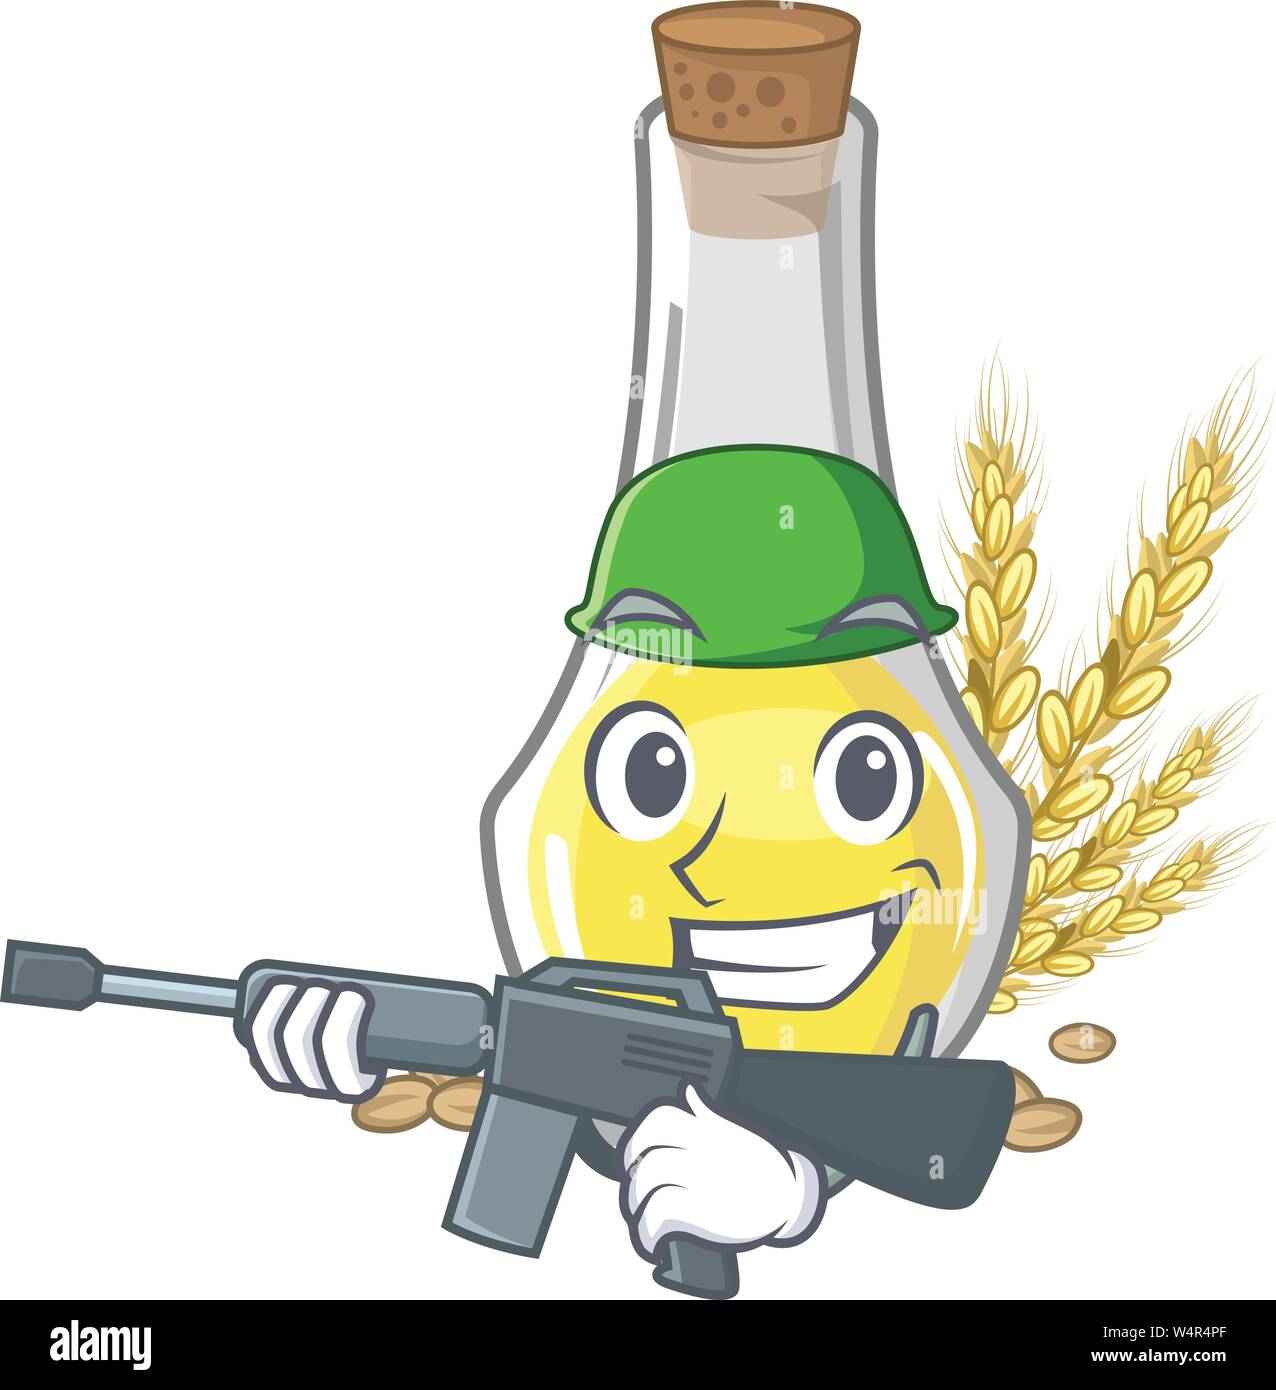 Army wheat germ oil with isolated character vector illustration Stock Vector